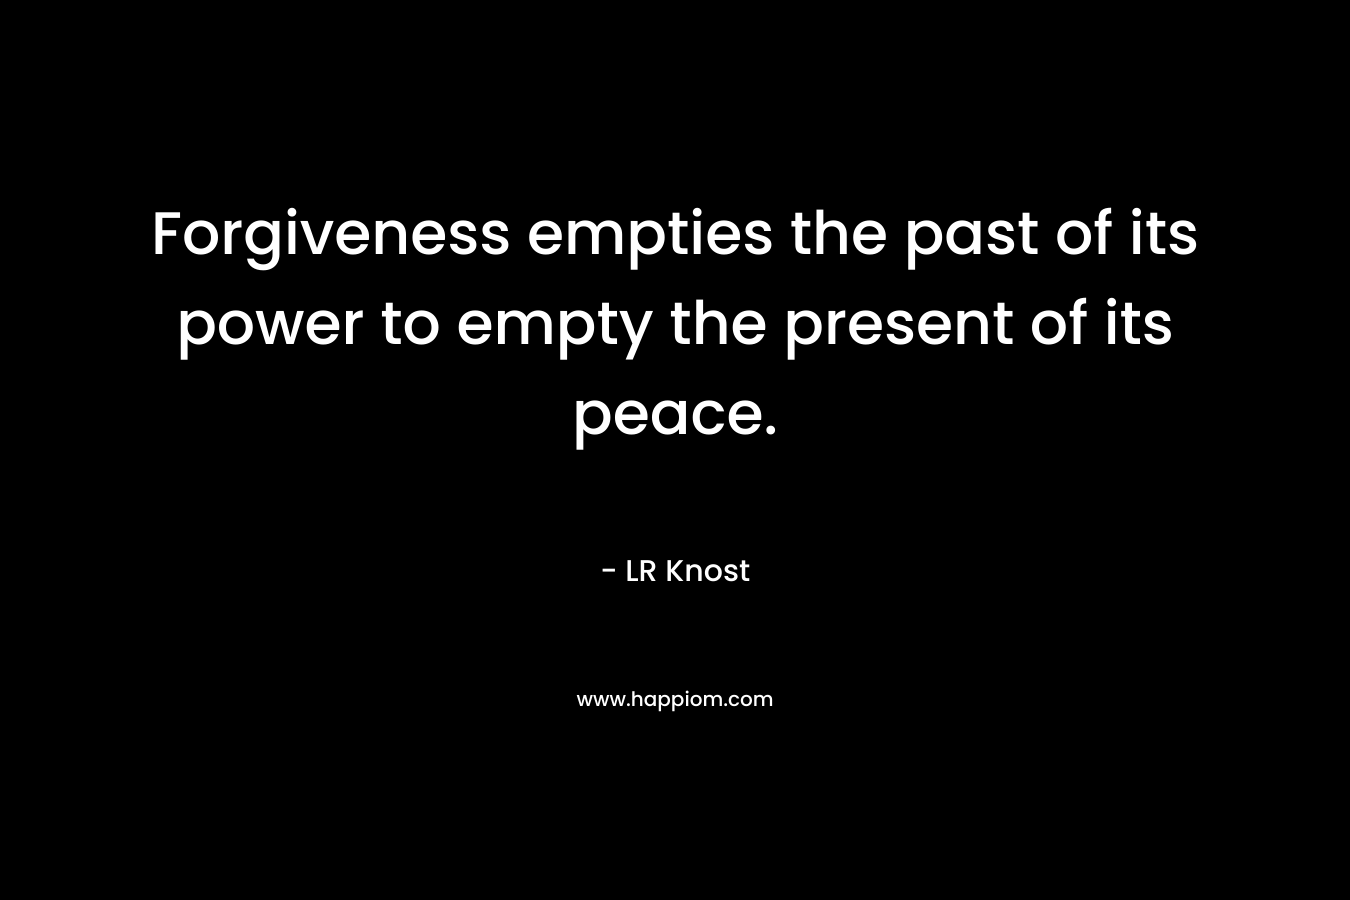 Forgiveness empties the past of its power to empty the present of its peace.